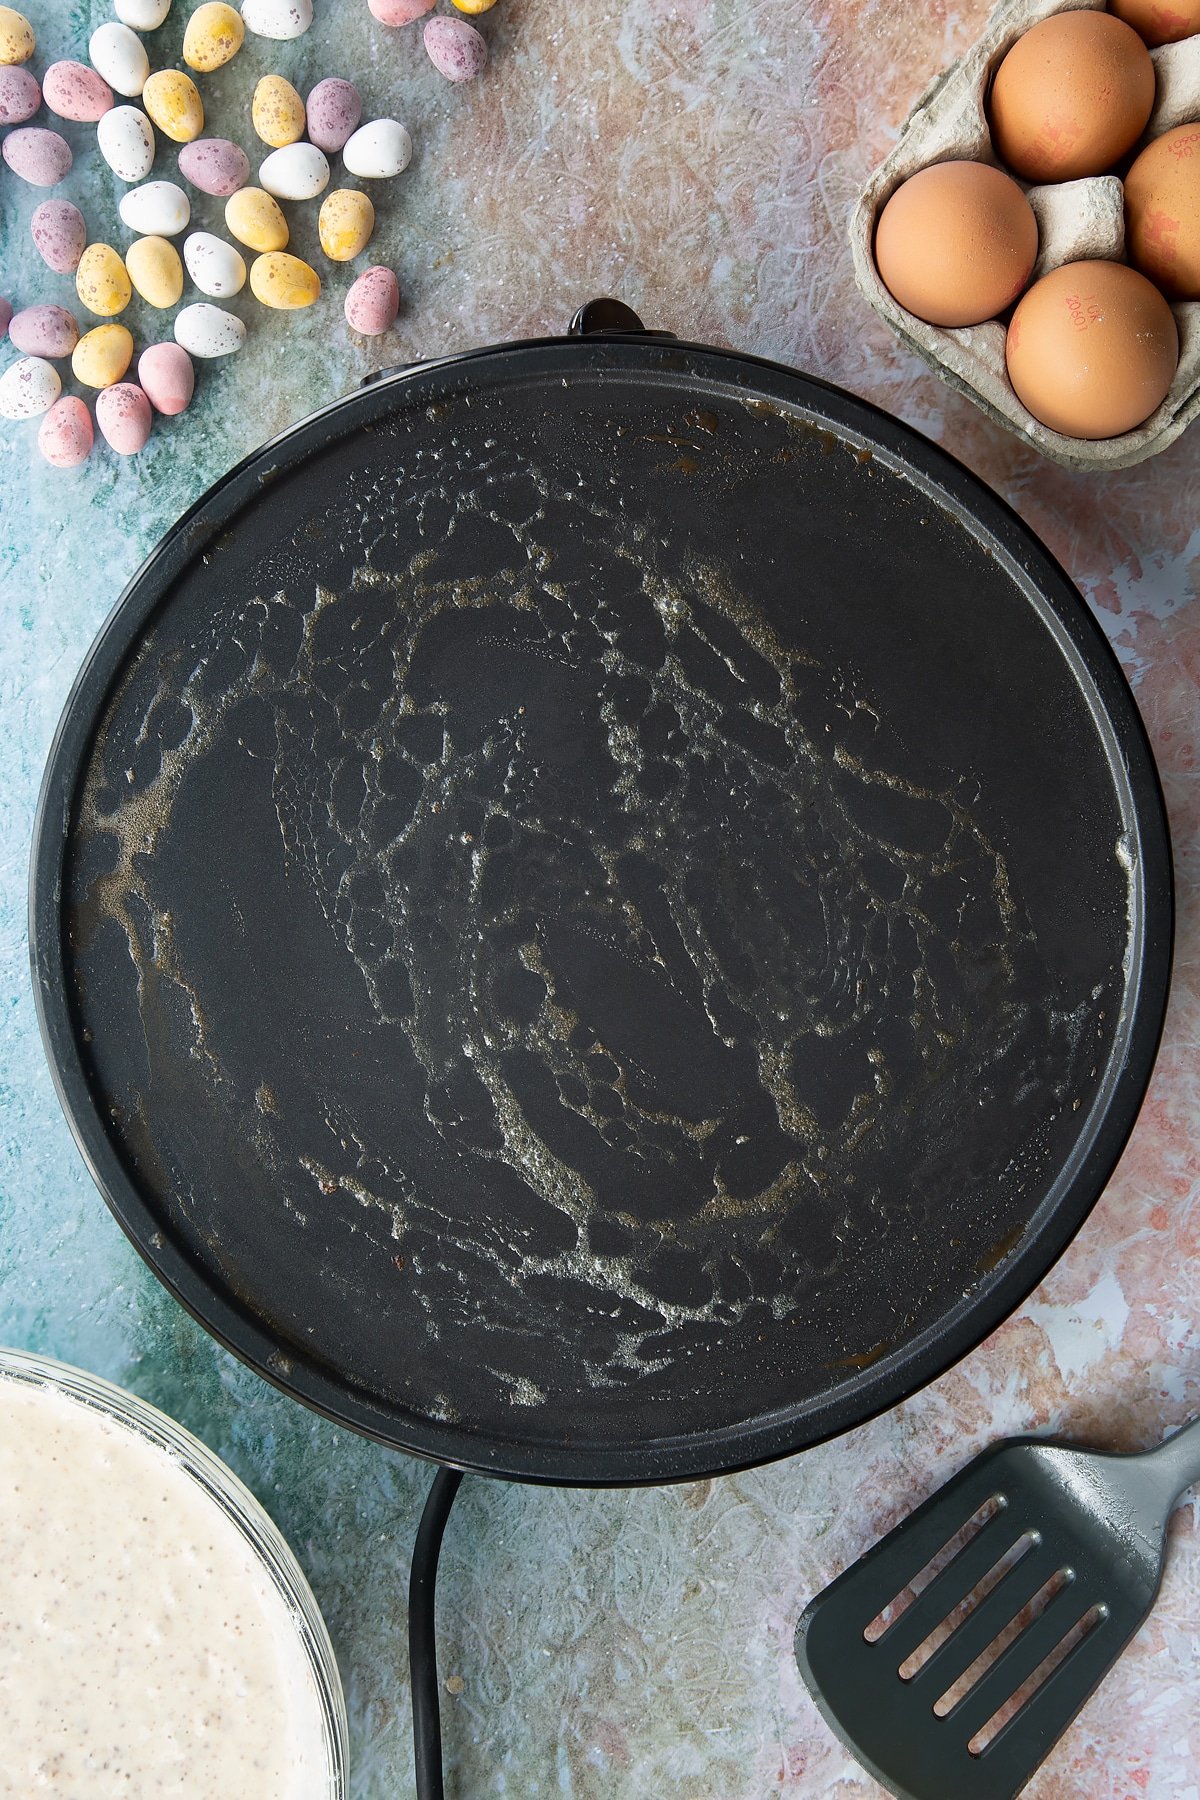 Melted butter on a hot pan. Ingredients to make Mini Egg pancakes surround the pan.